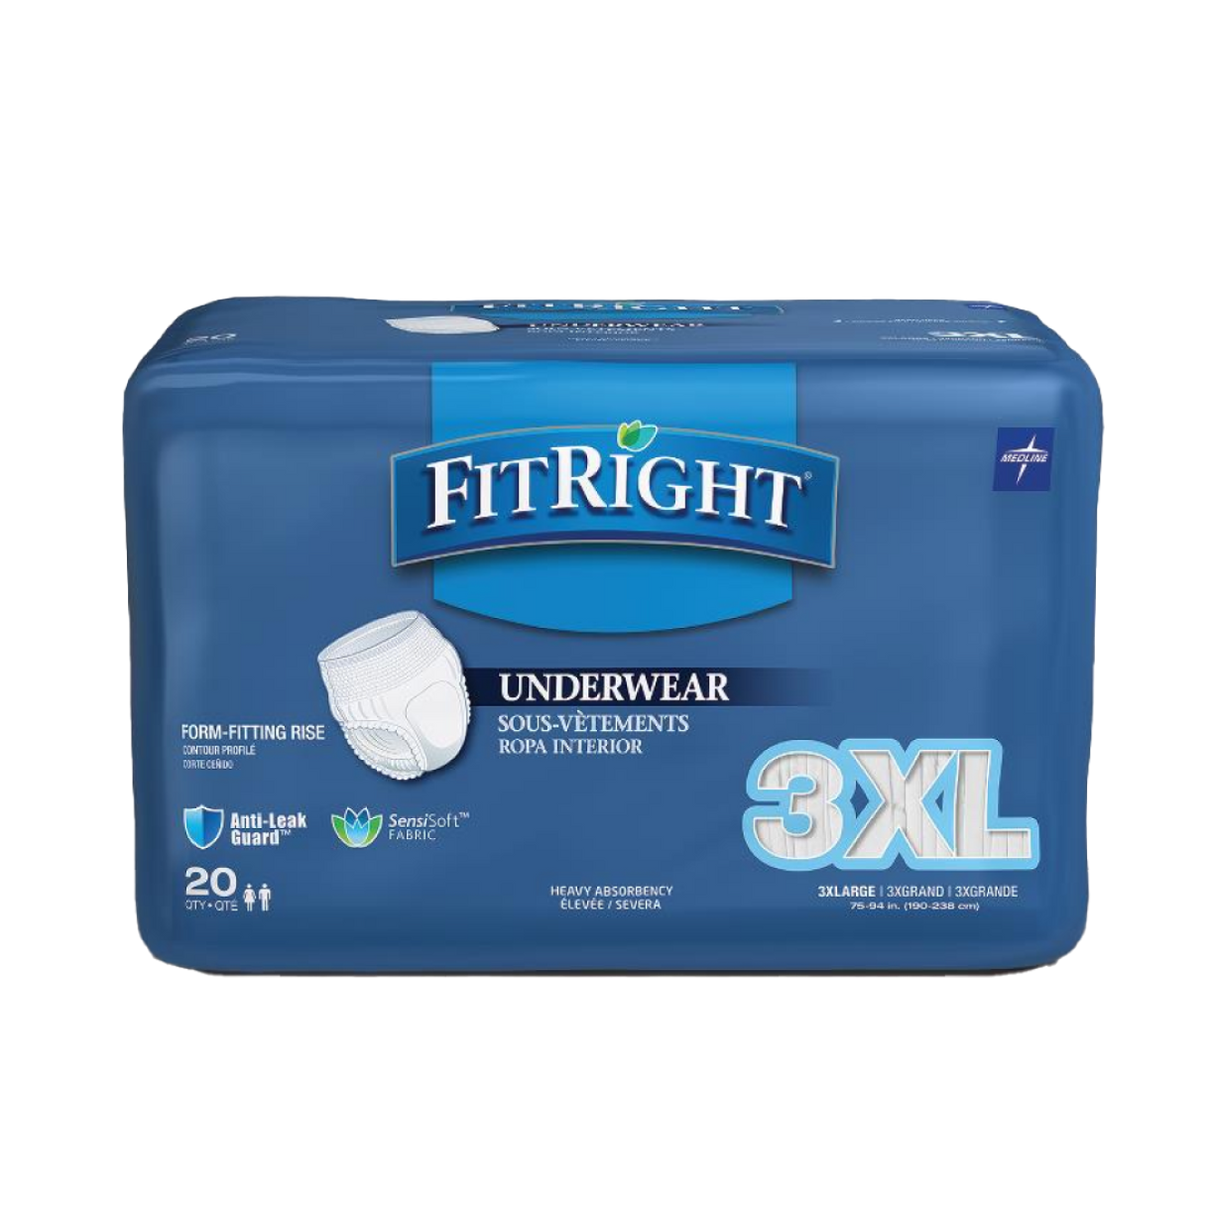 FitRight Ultra Underwear for Men - You Can Home Medical